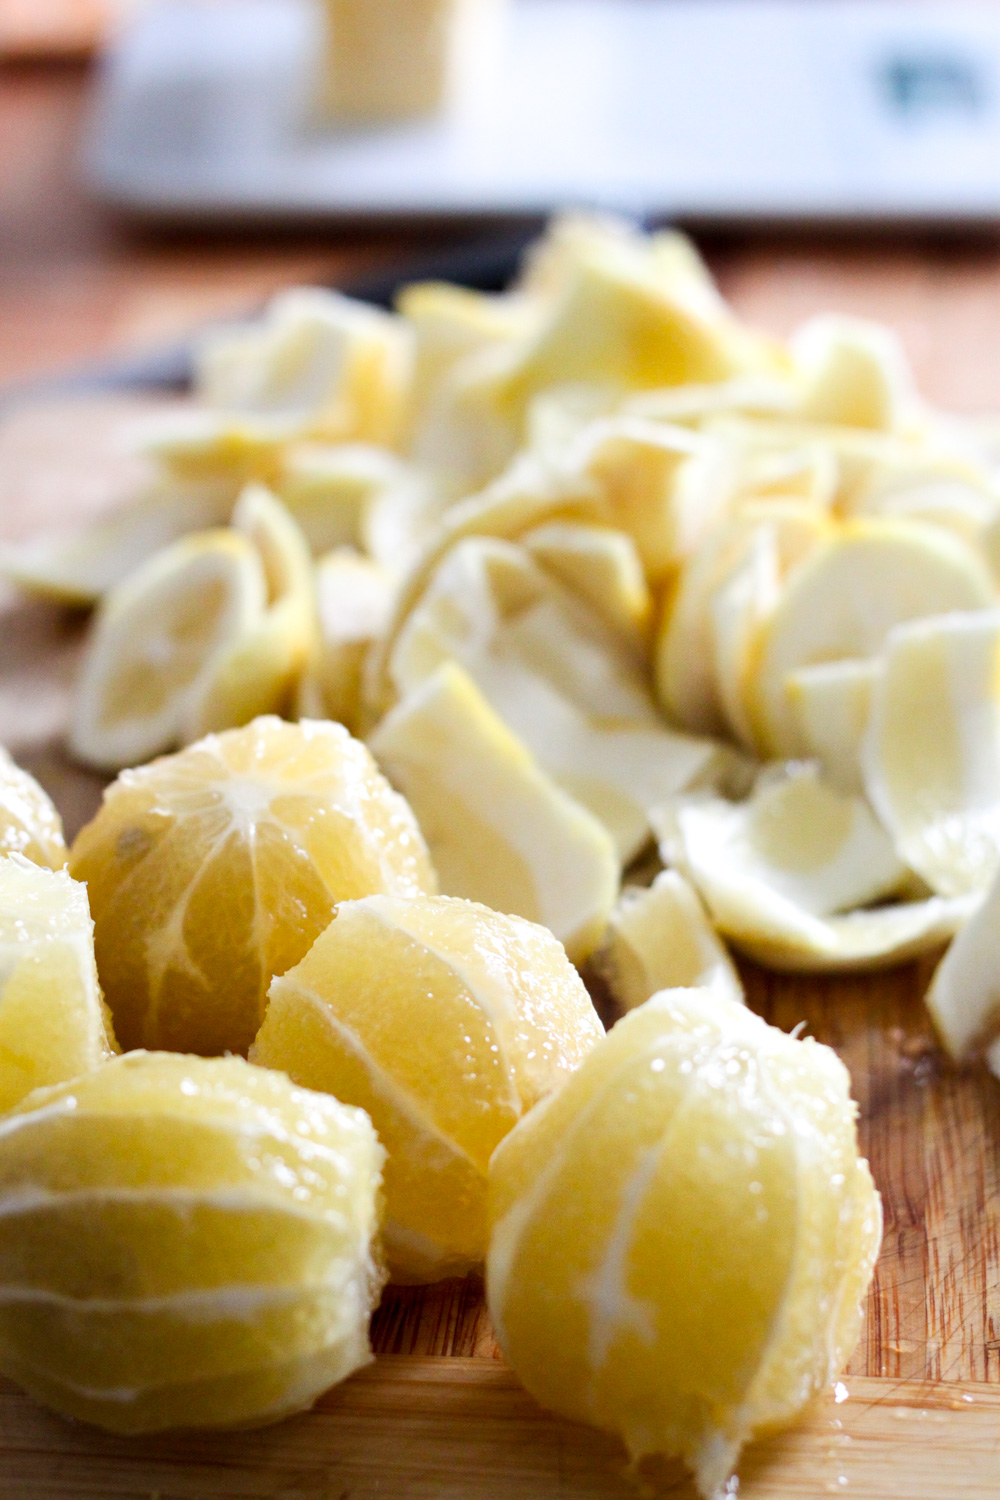 Cutting the rinds off lemons (Eat Me. Drink Me.)